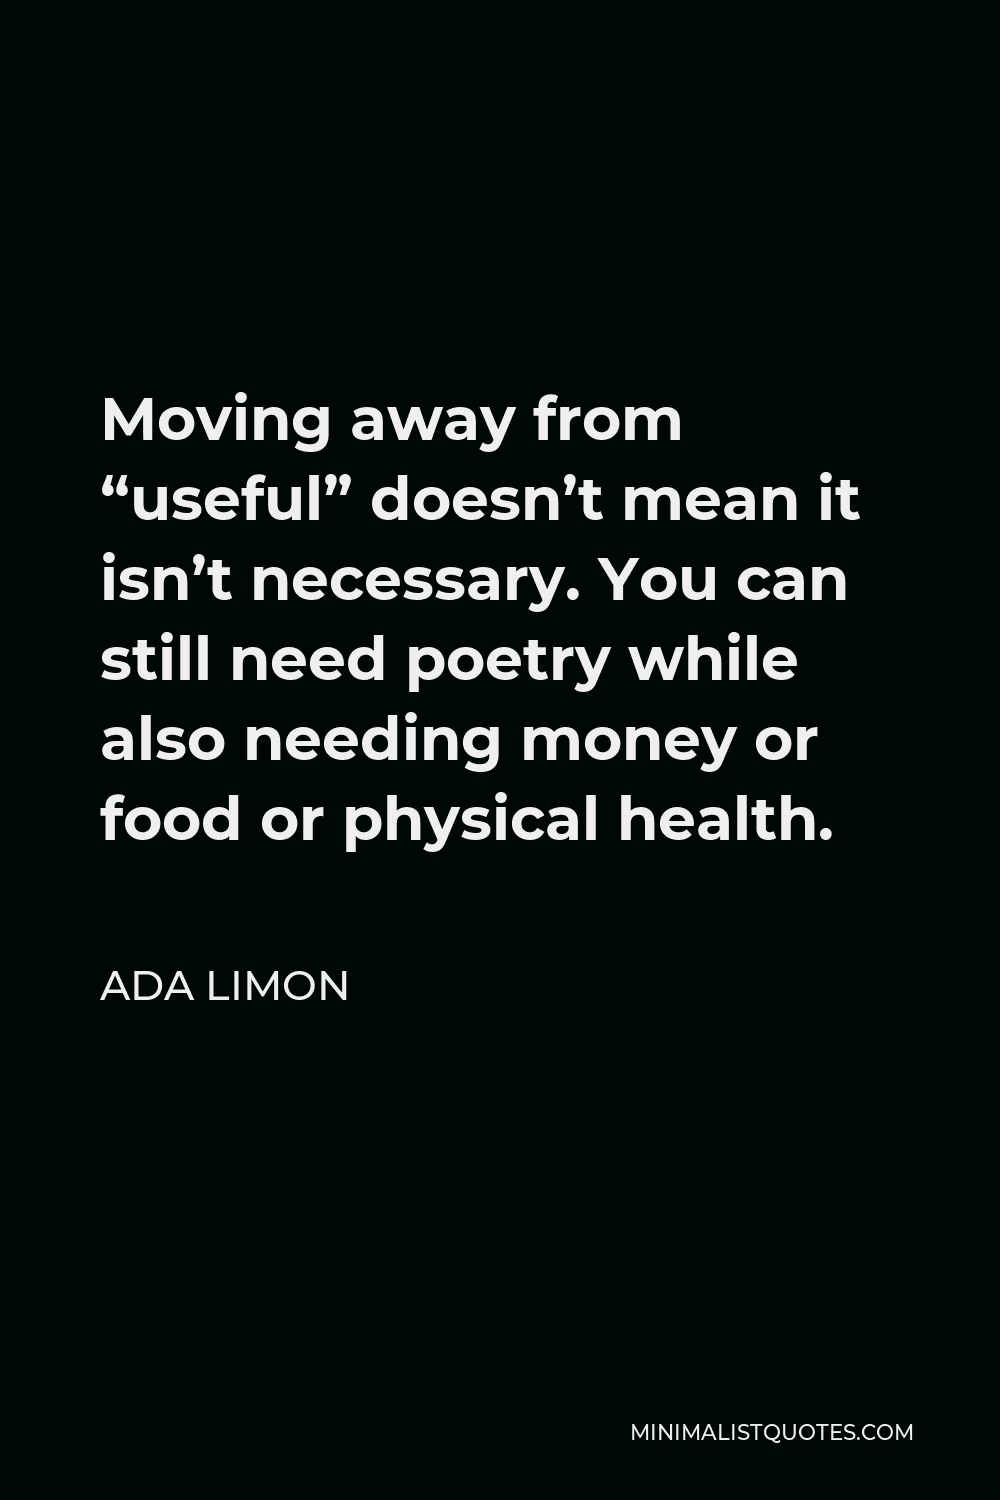 Ada Limon Quote - Moving away from “useful” doesn’t mean it isn’t necessary. You can still need poetry while also needing money or food or physical health.